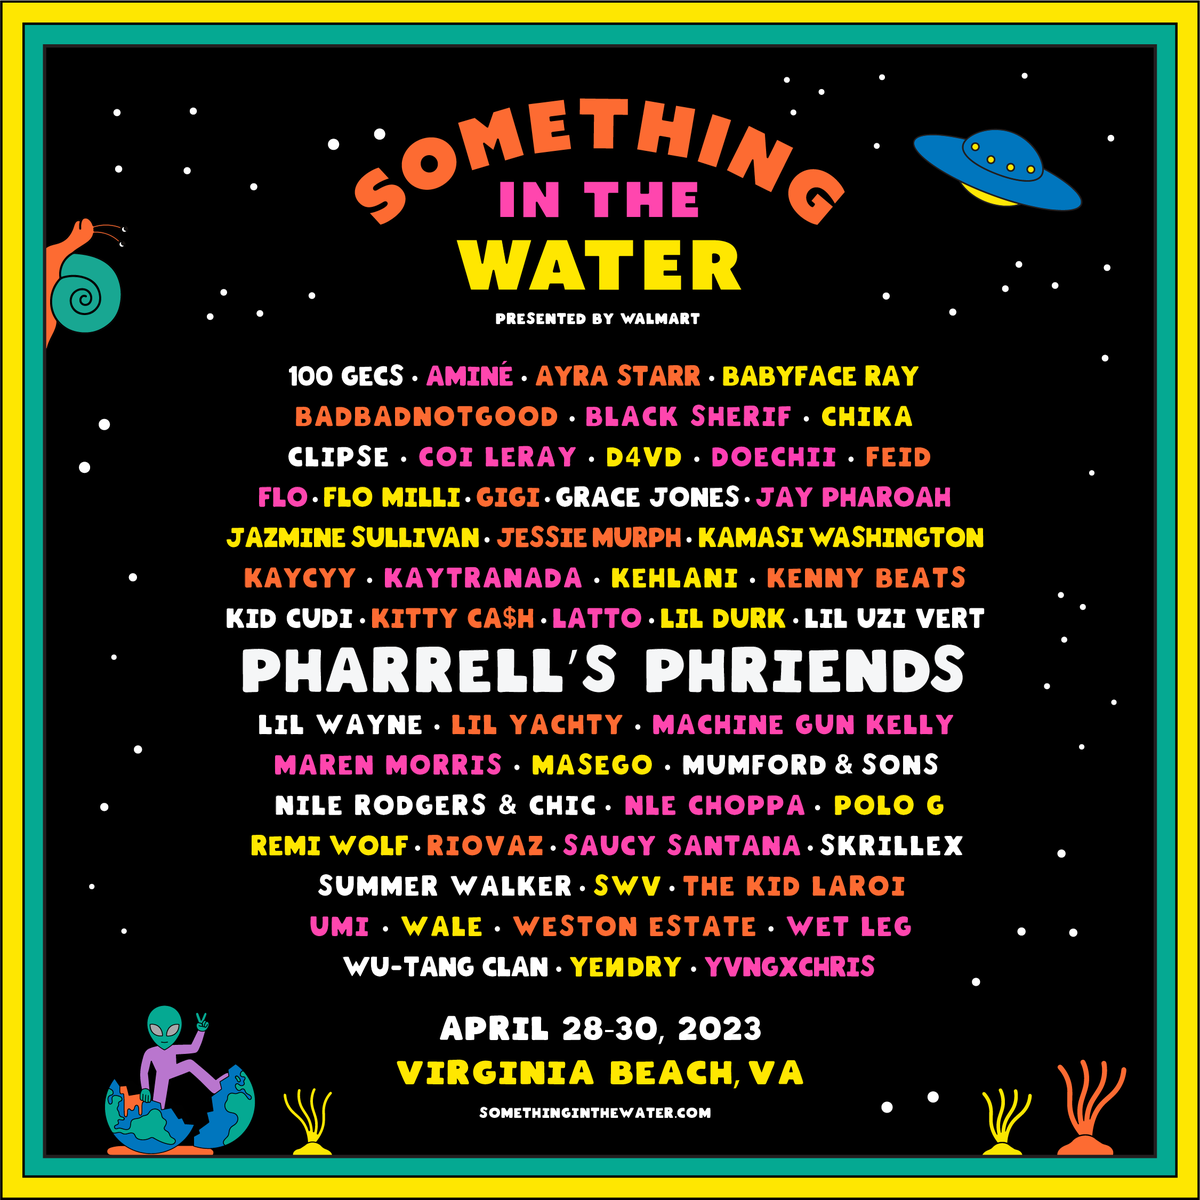 See you in Virginia Beach April 28-30 @sitw #SITWfest somethinginthewater.com